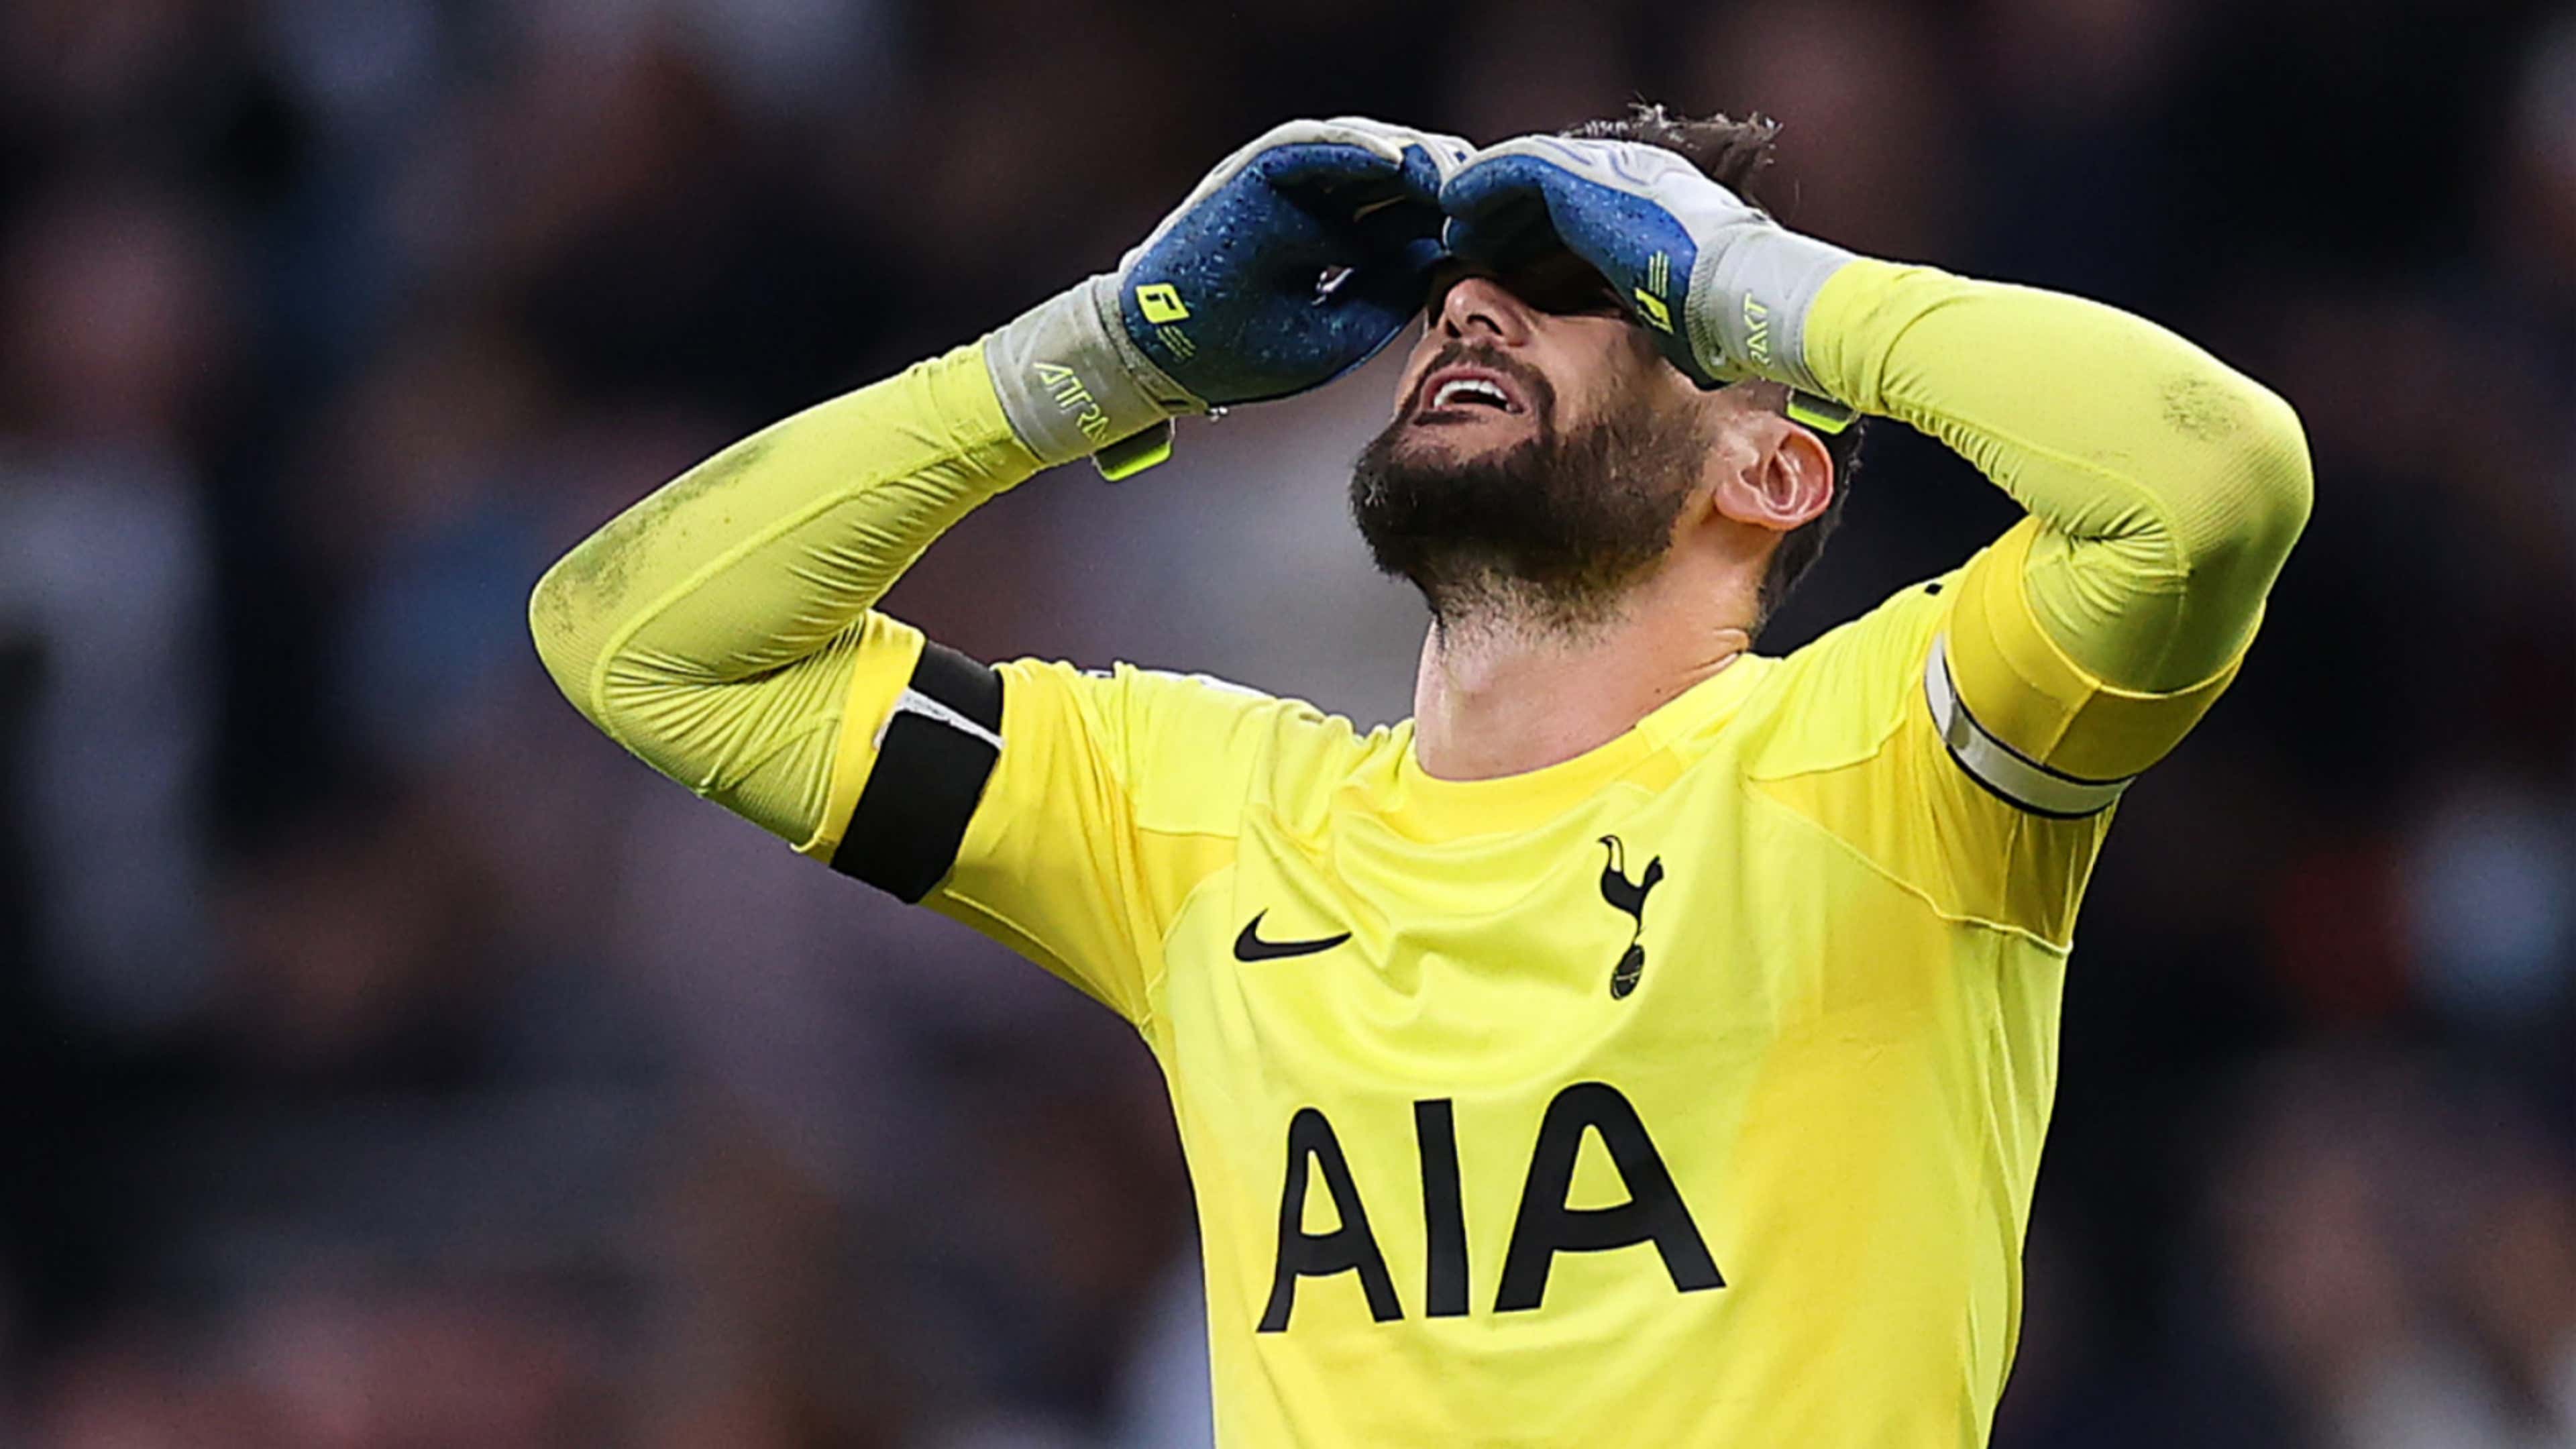 Hugo Lloris subbed for Fraser Forster at half-time after conceding FIVE in  opening 21 minutes of Tottenham's Premier League clash with Newcastle